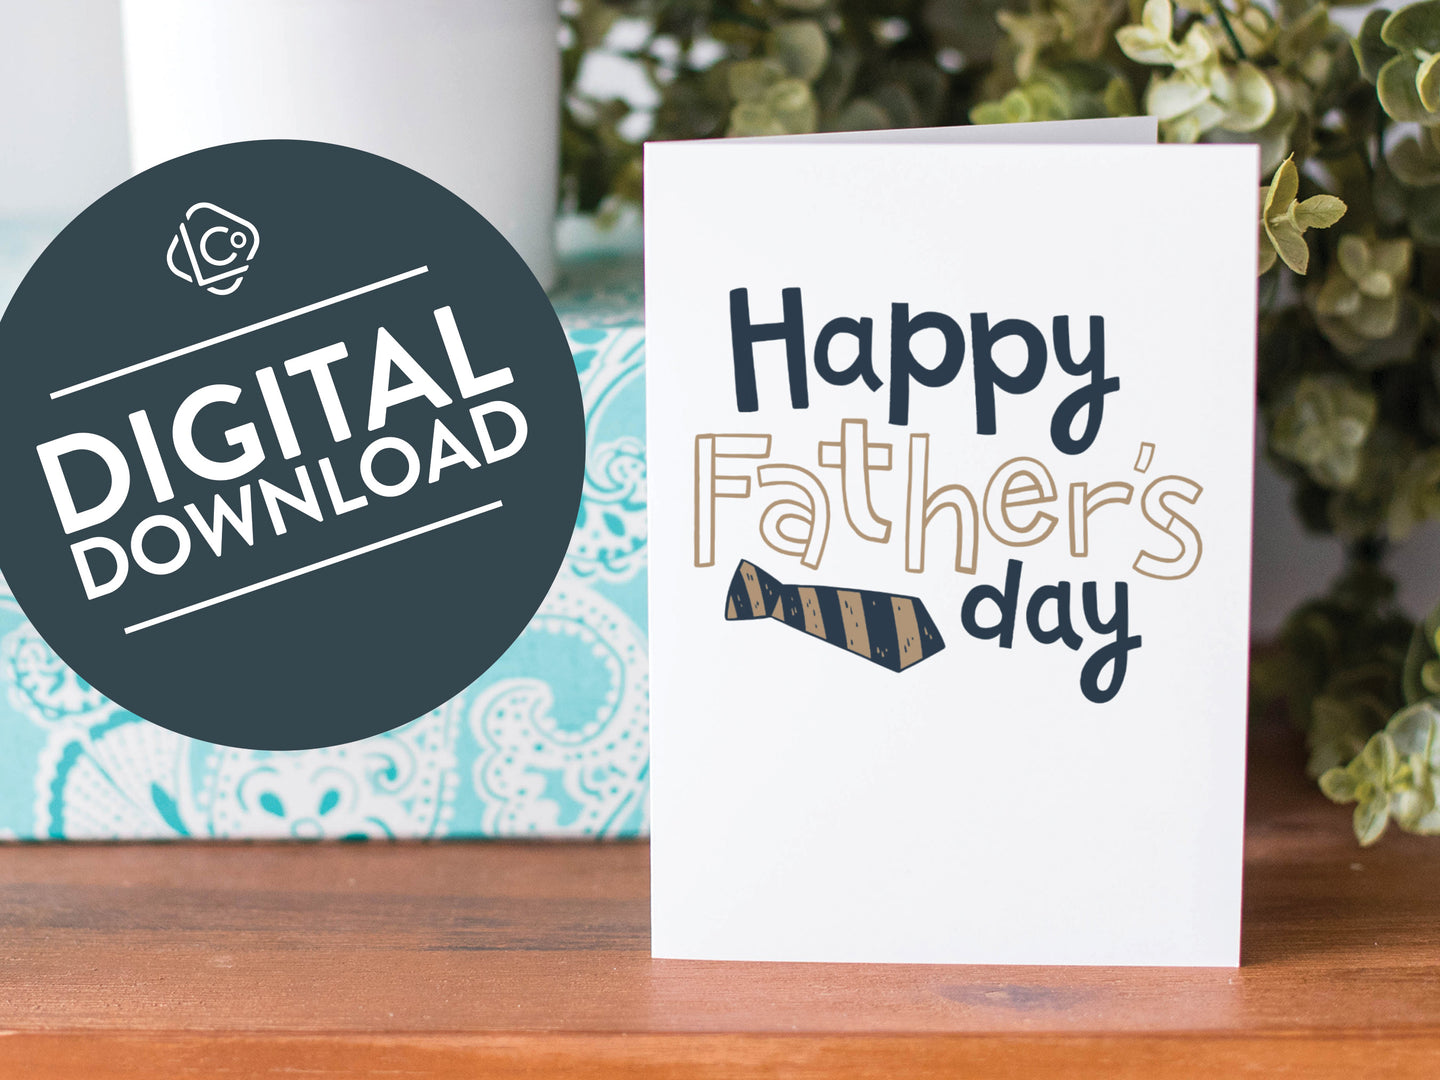 A greeting card is on a table top with a present in blue wrapping paper in the background. On top of the present is a candle and some greenery from a plant too. The card features the words  “Happy Father’s  Day” with a striped tie on the bottom of the words. The words 